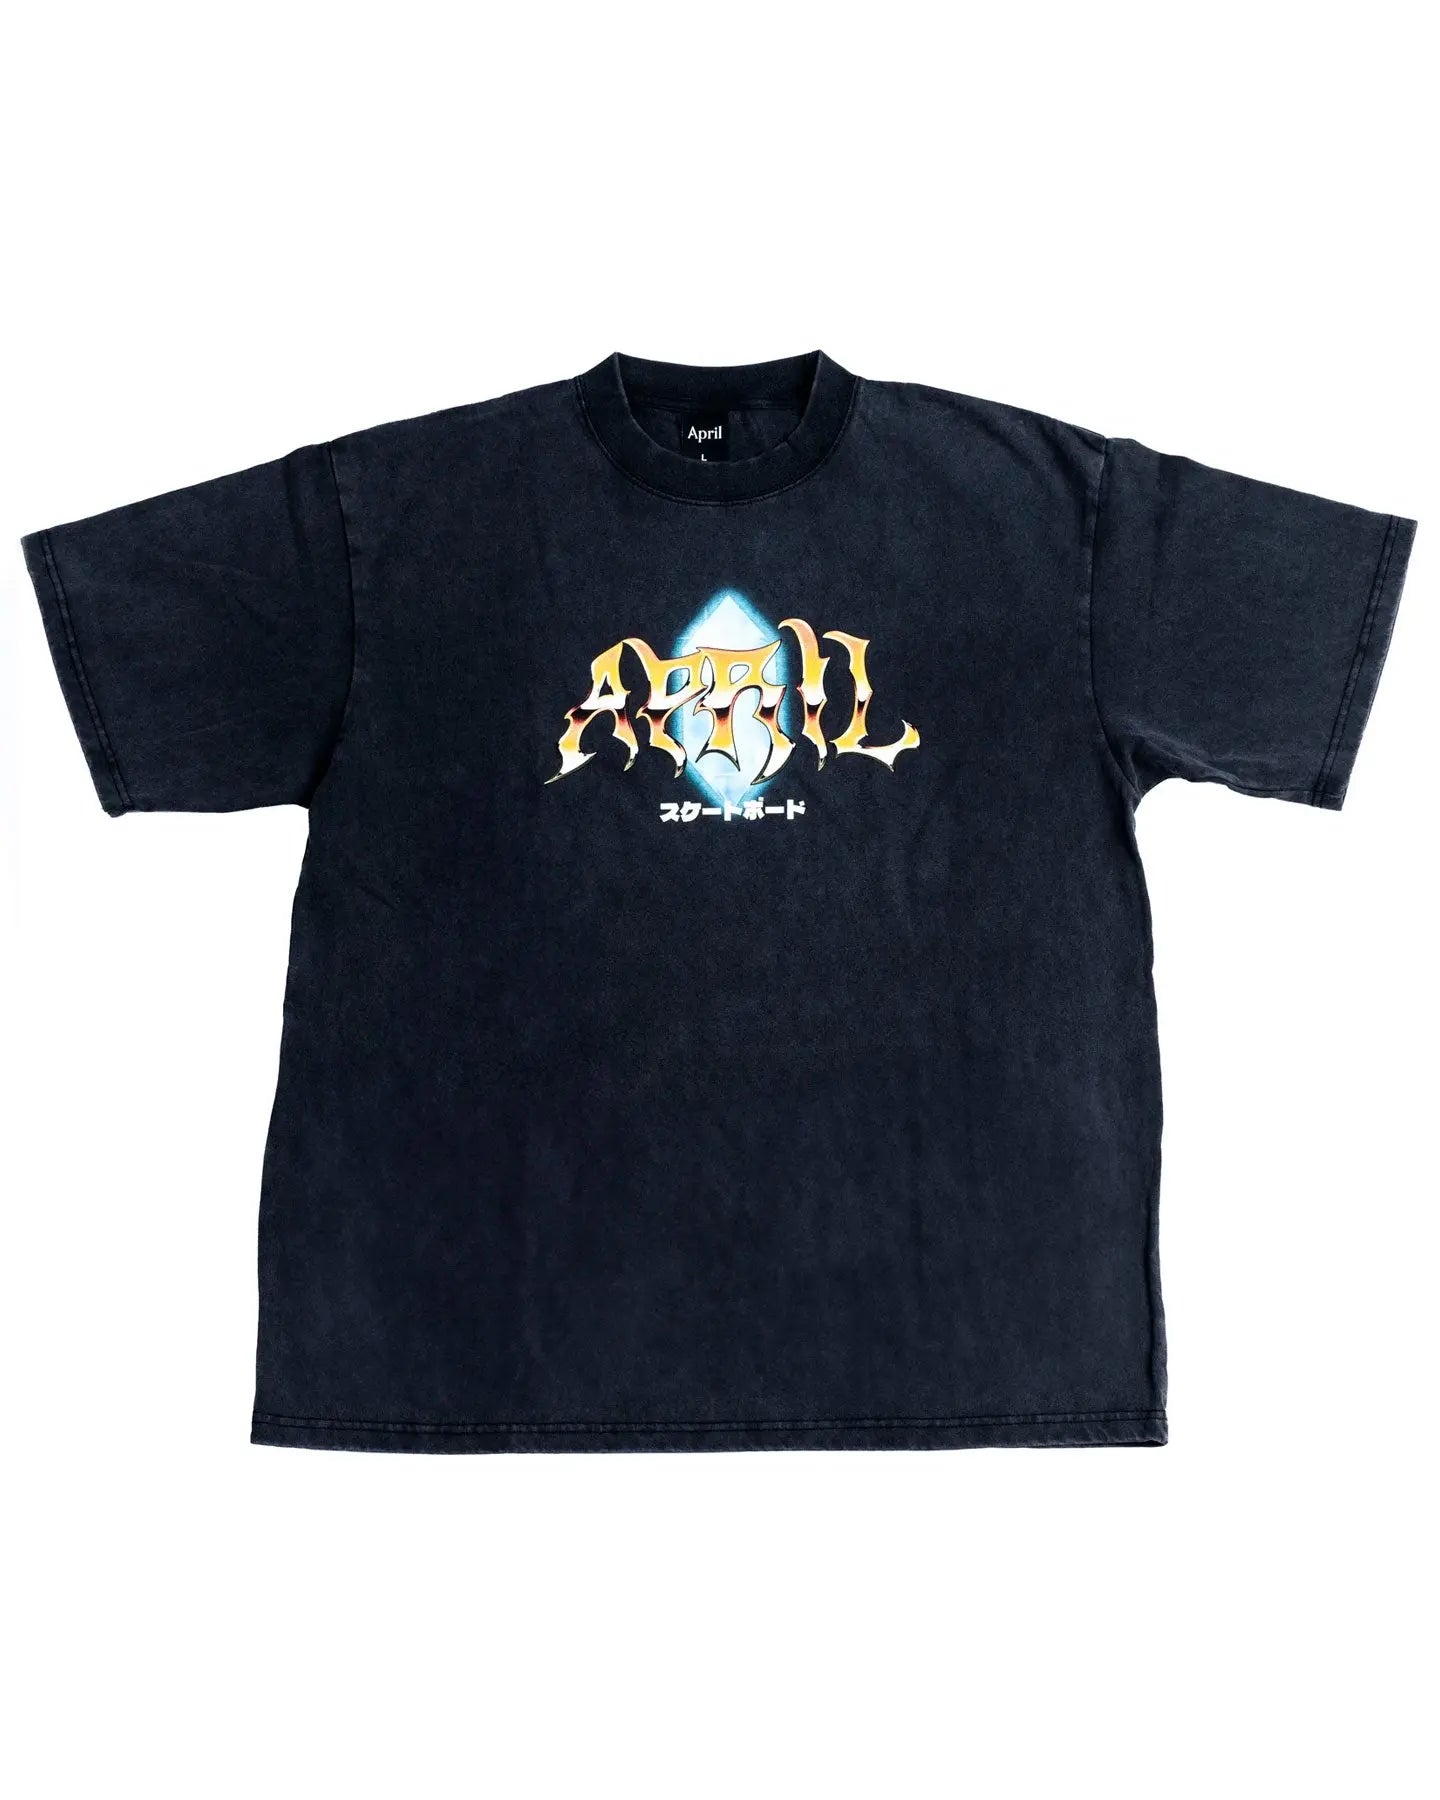 April Skateboarding SS Tee - Washed Black SS Tees